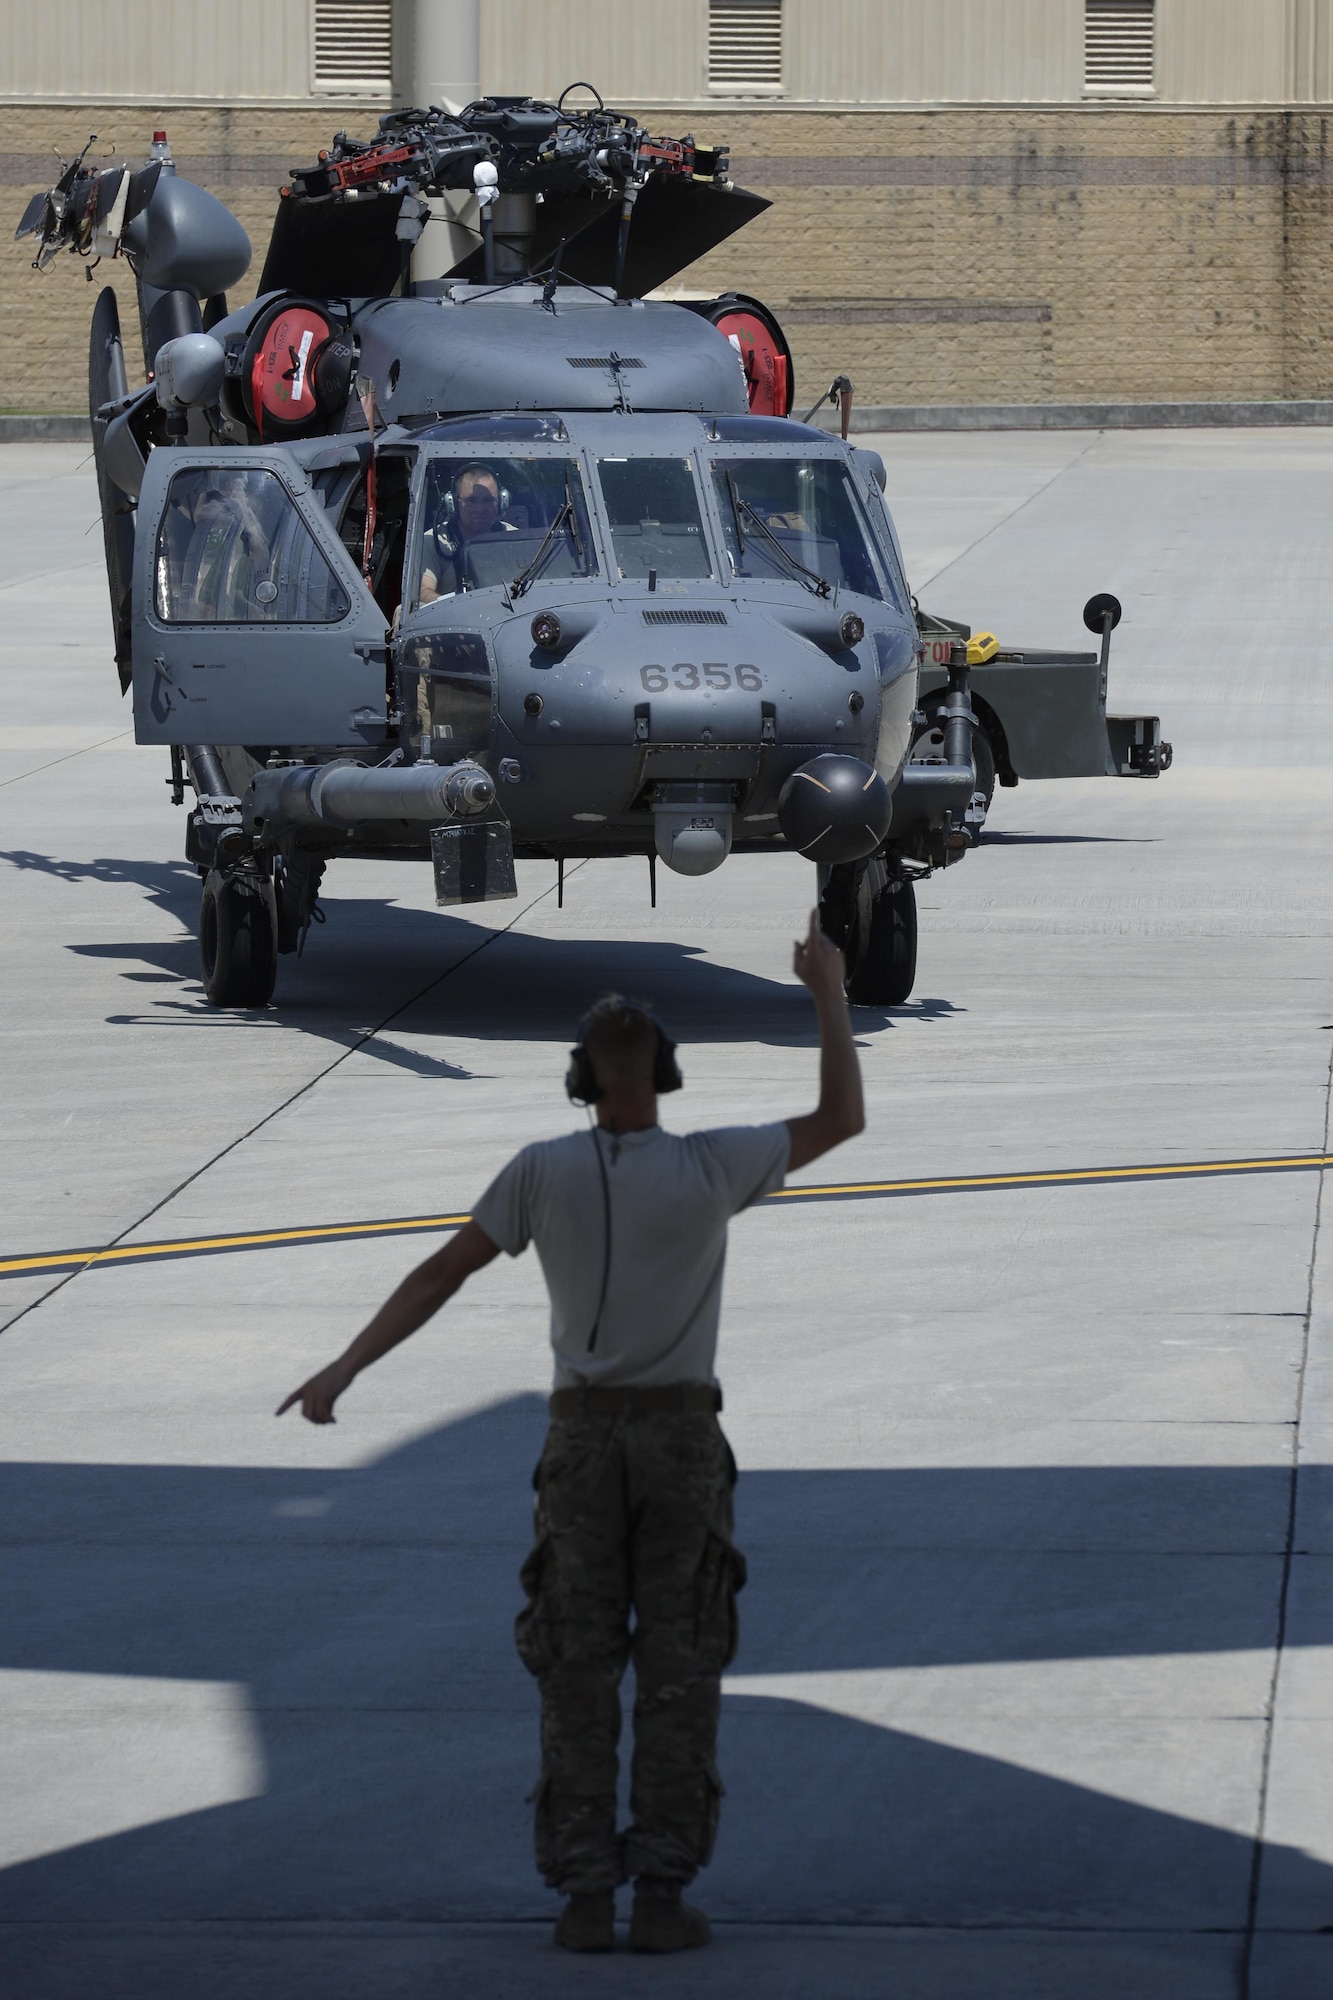 A member of the 723d Aircraft Maintenance Squadron, 41st Helicopter Maintenance Unit assigned to Moody Air Force Base, Ga., marshals an HH-60G Pave Hawk search and rescue helicopter toward a 3d Airlift Squadron C-17 Globemaster III May 15, 2017, at Moody AFB. Loading the helicopter required the use of vehicles, a winch and about 10 Airmen pushing, pulling and steering. (U.S. Air Force photo by Senior Airman Aaron J. Jenne)